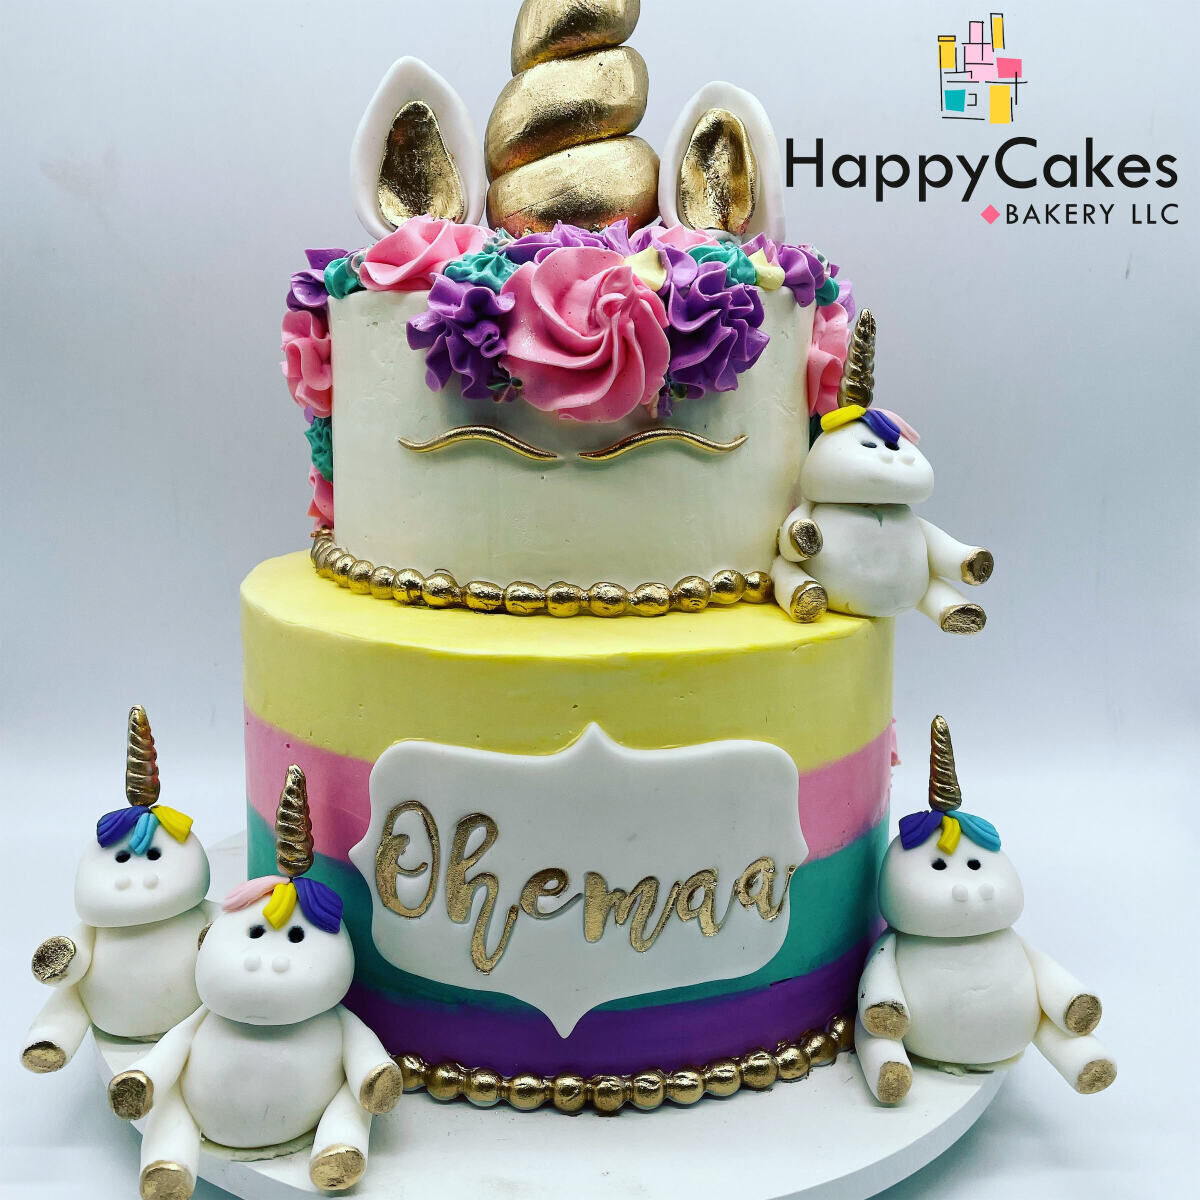 Happy Cakes from Swirlz Cupcakes | See Cupcakes Take the Cak… | Flickr